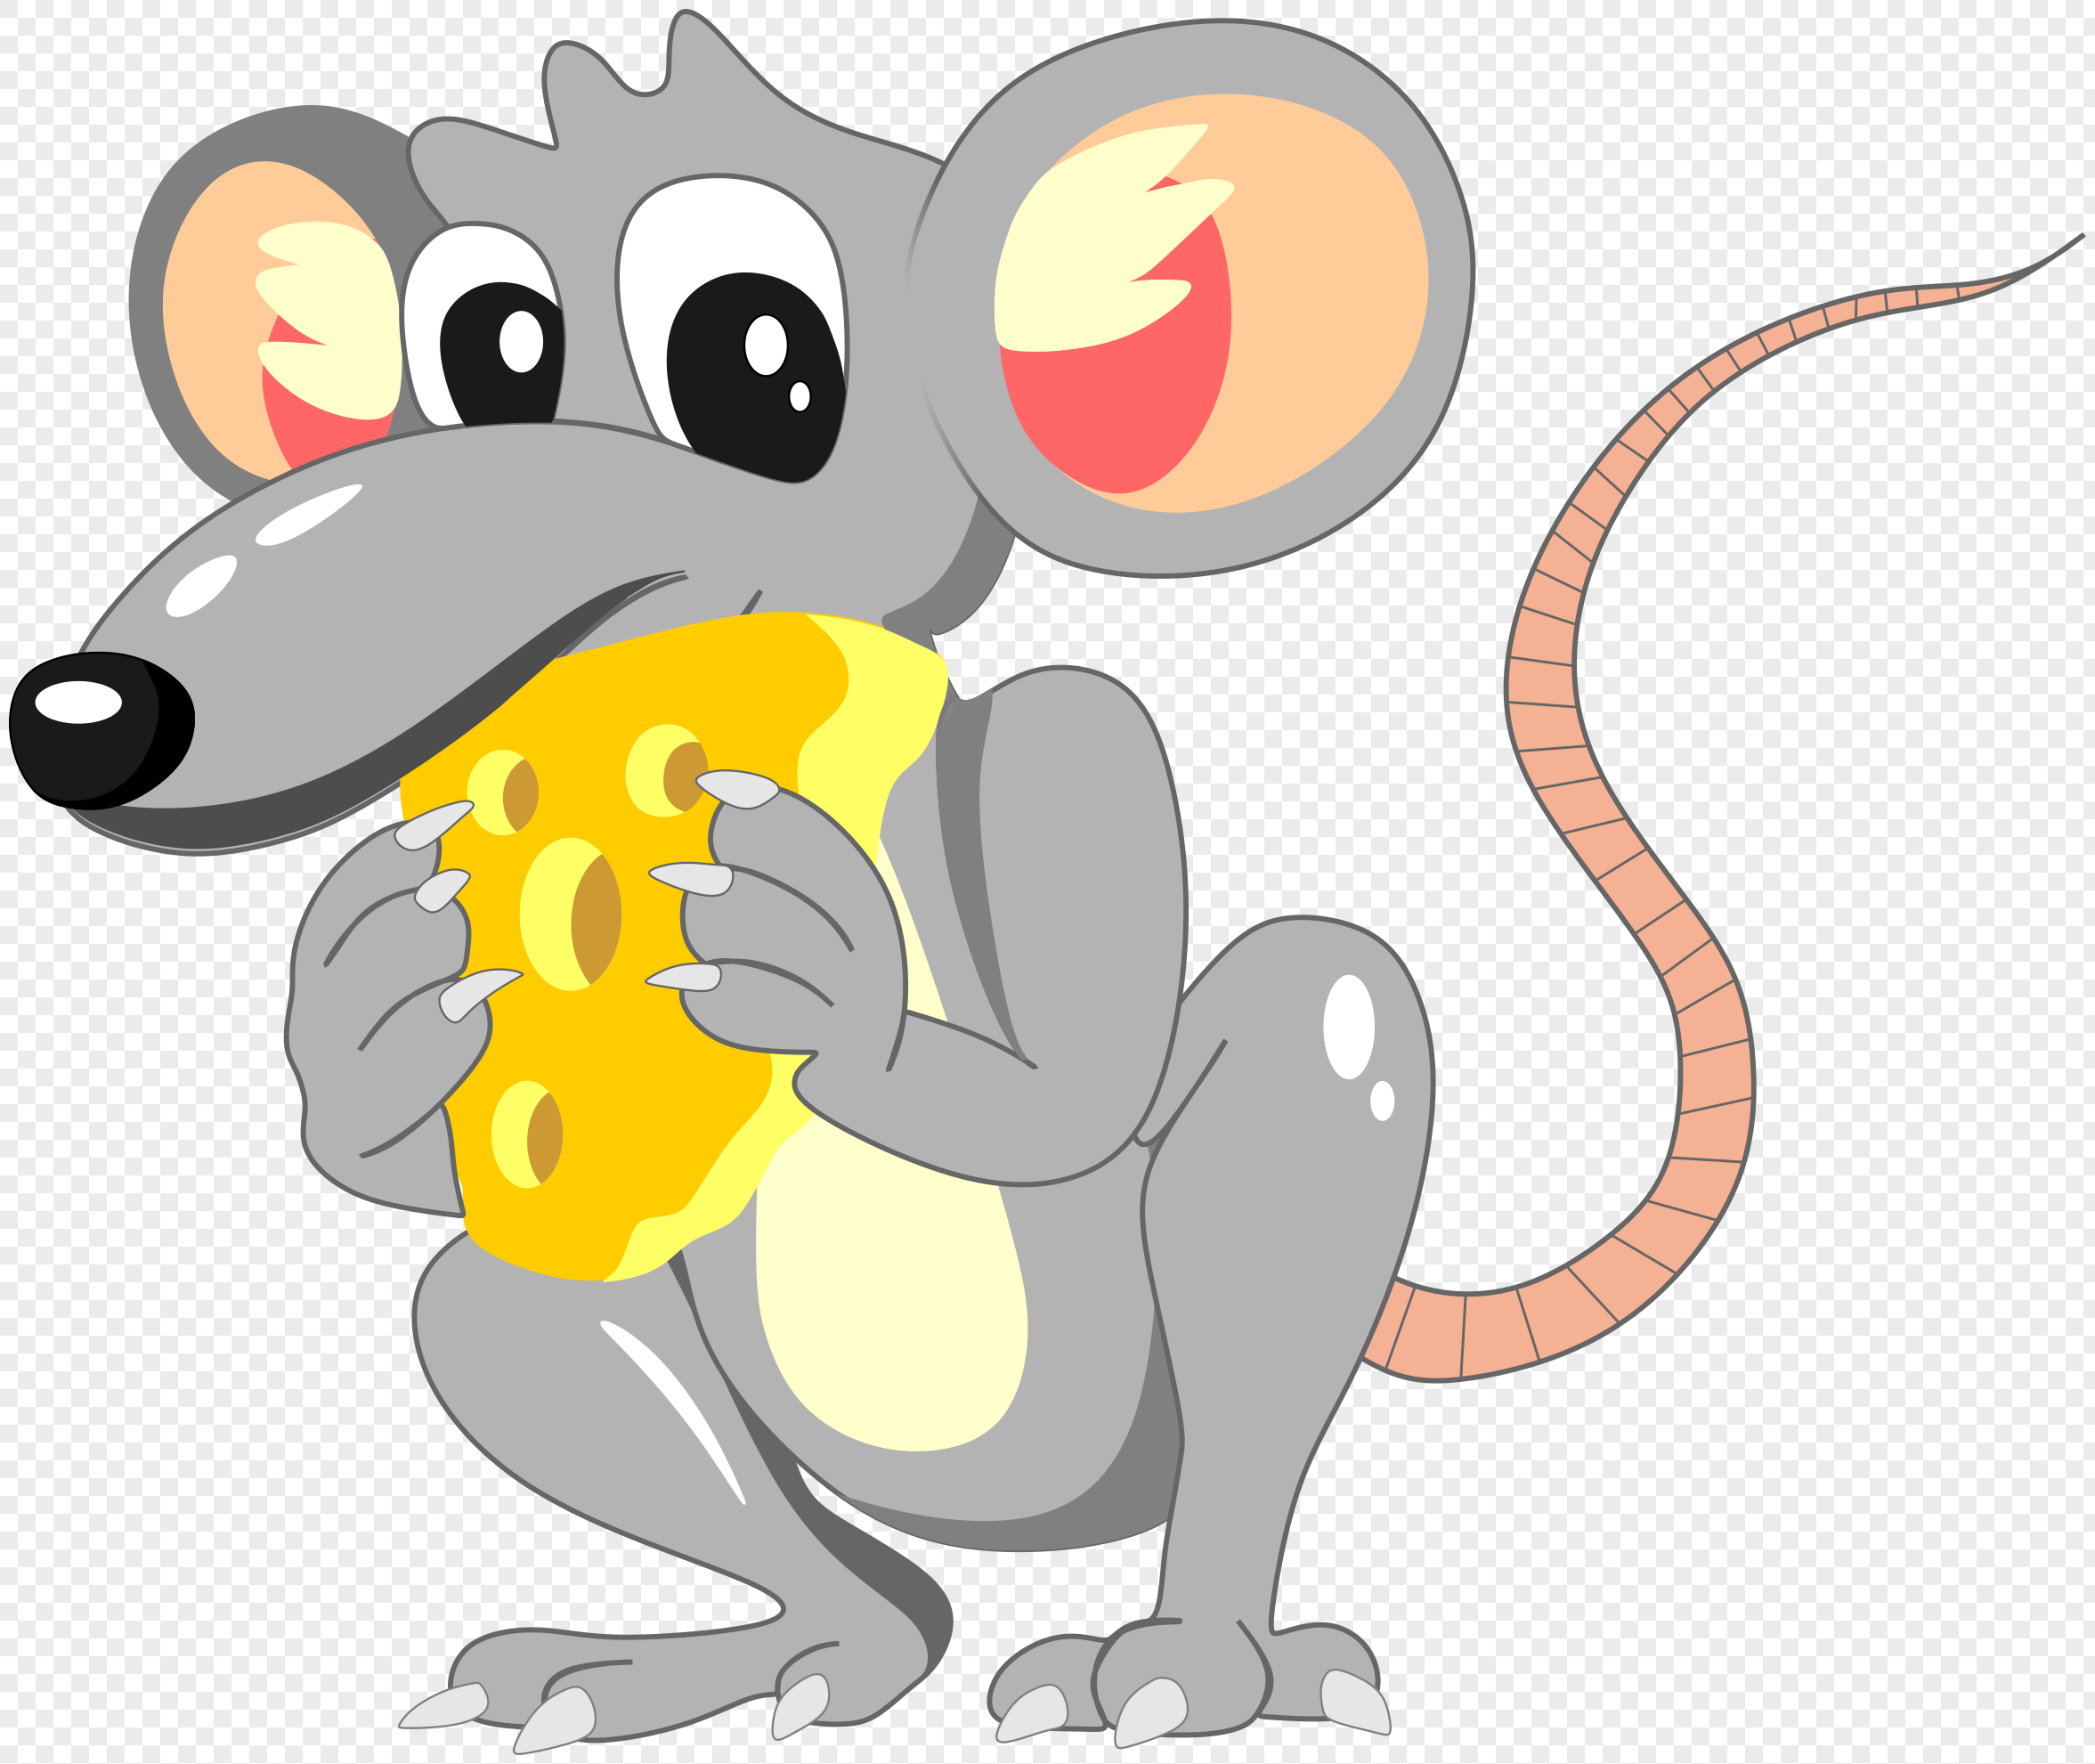 cartoon mouse eating cheese